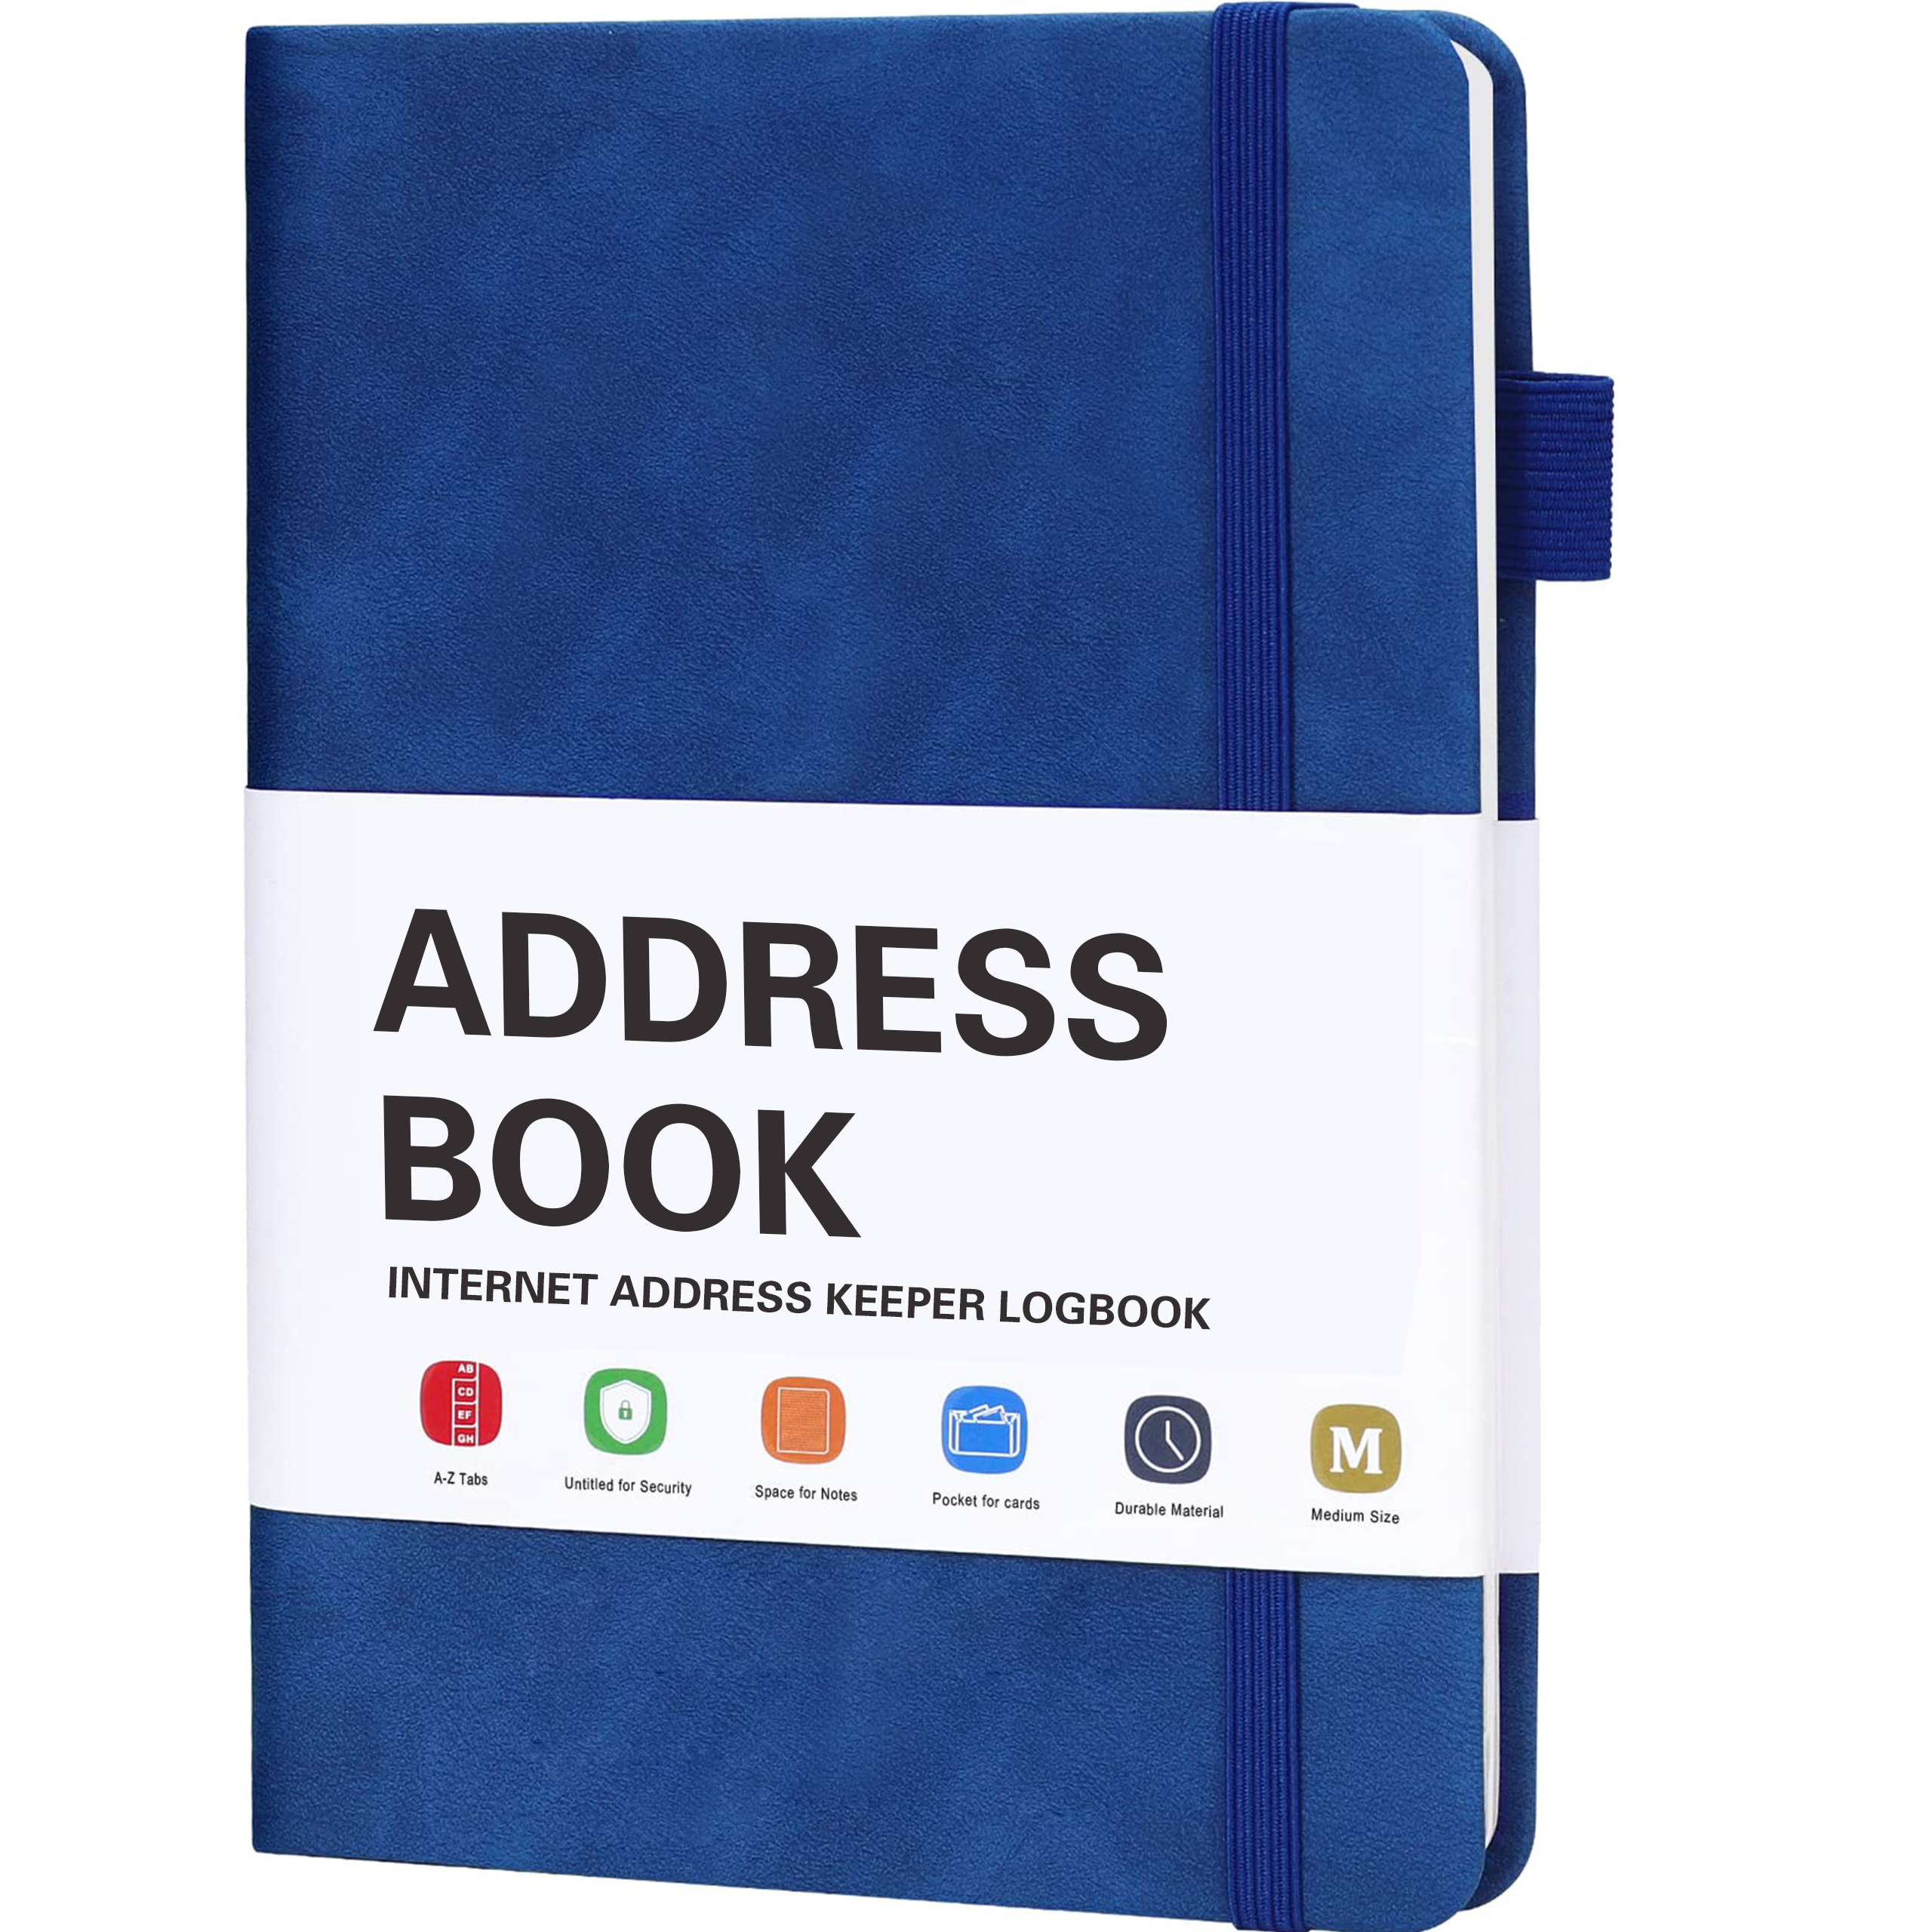 How to get your own design cover and interior Internet Password Keeper Logbook?